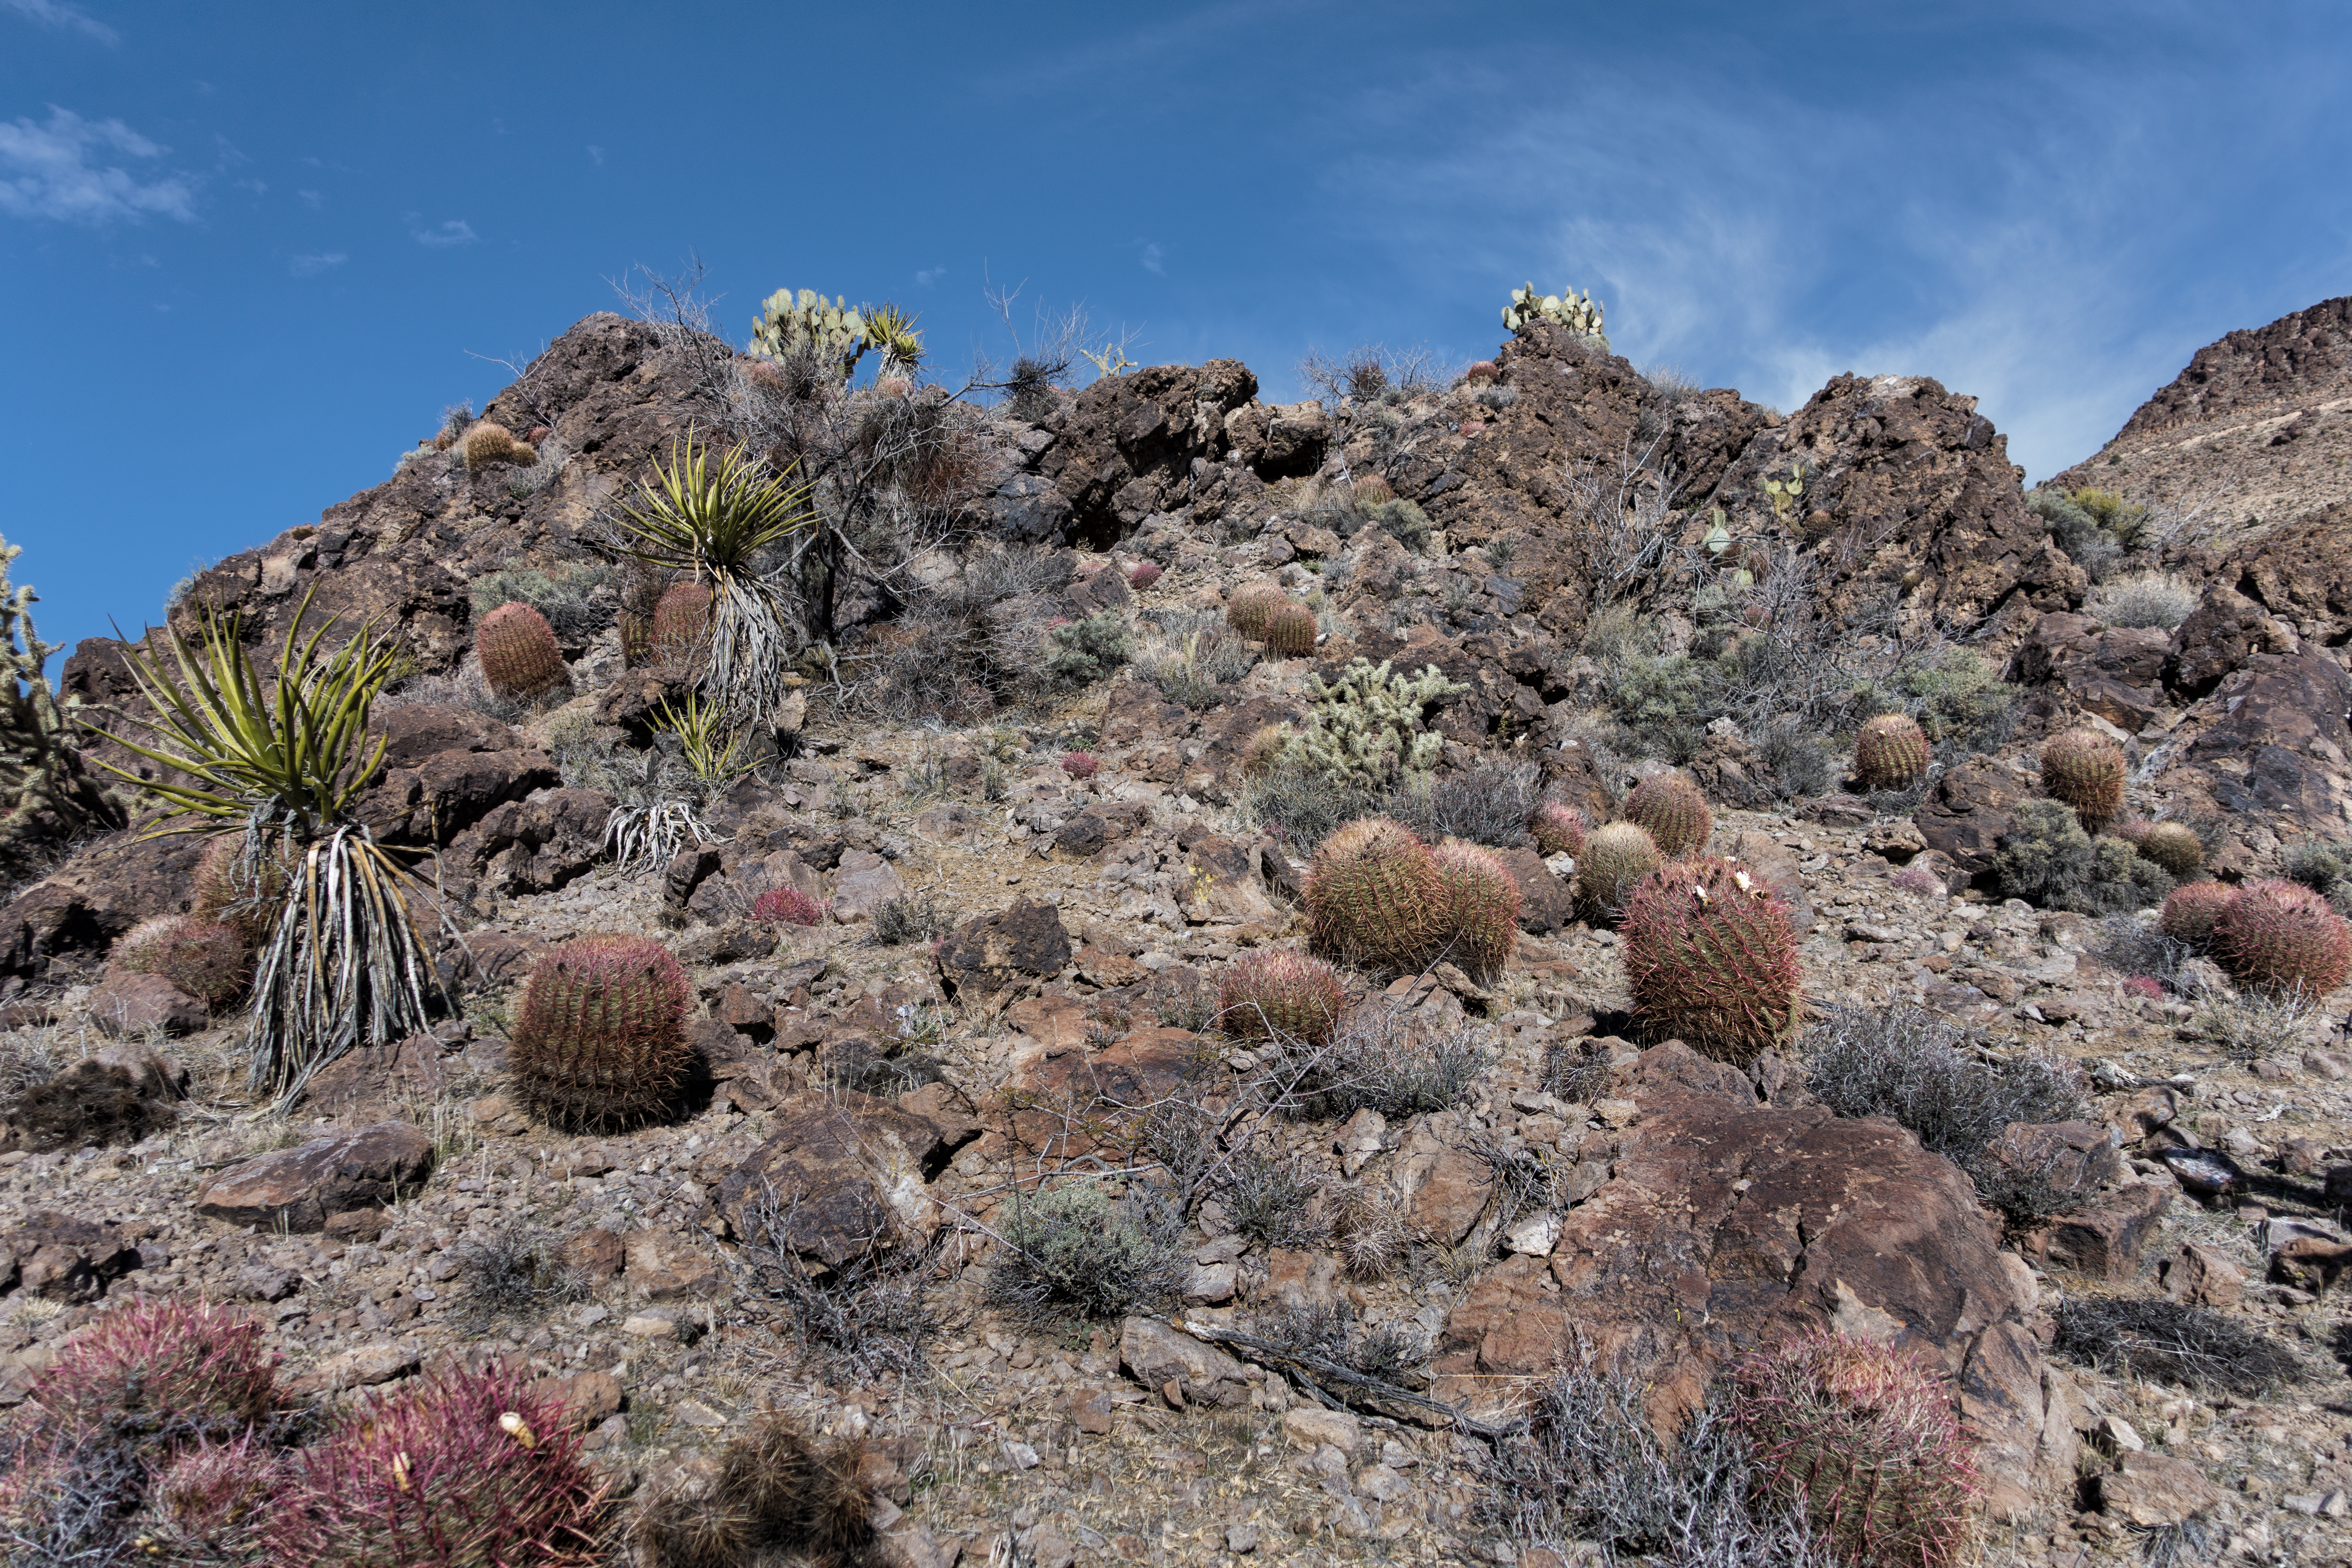 Desert plants including yucca, cholla cactus, and prickly pear cactus grow between patches of bare soil and rock.